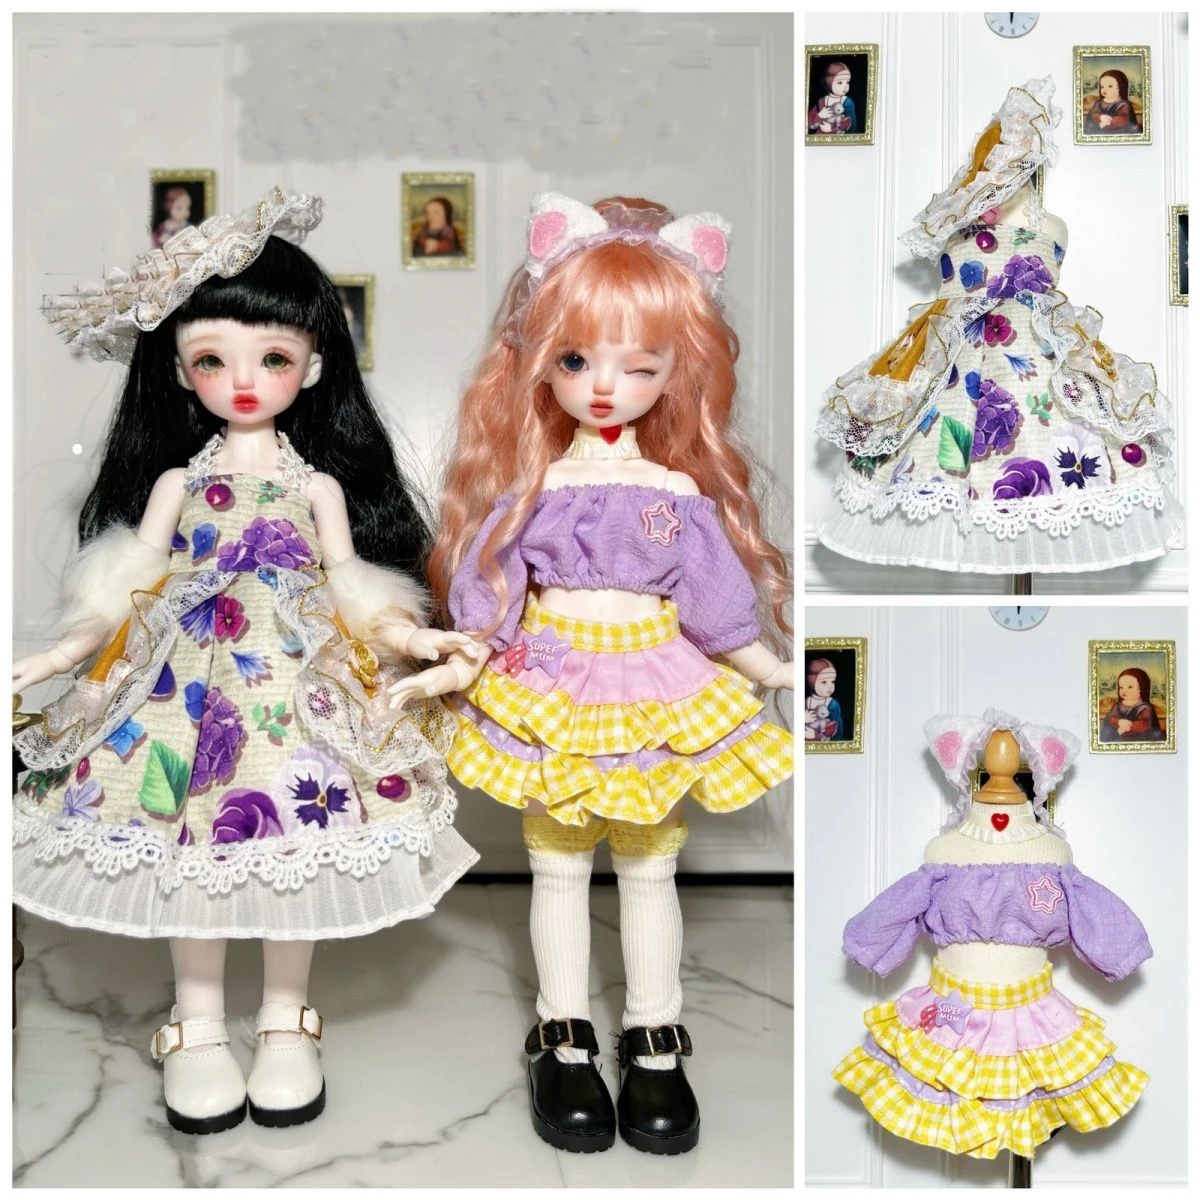 

New 30cm Doll's Clothes for 1/6 Fat SD Bjd Doll Sweet Cute Skirt DIY Girl Toys Dress Up Fashion Doll Accessories, No Doll